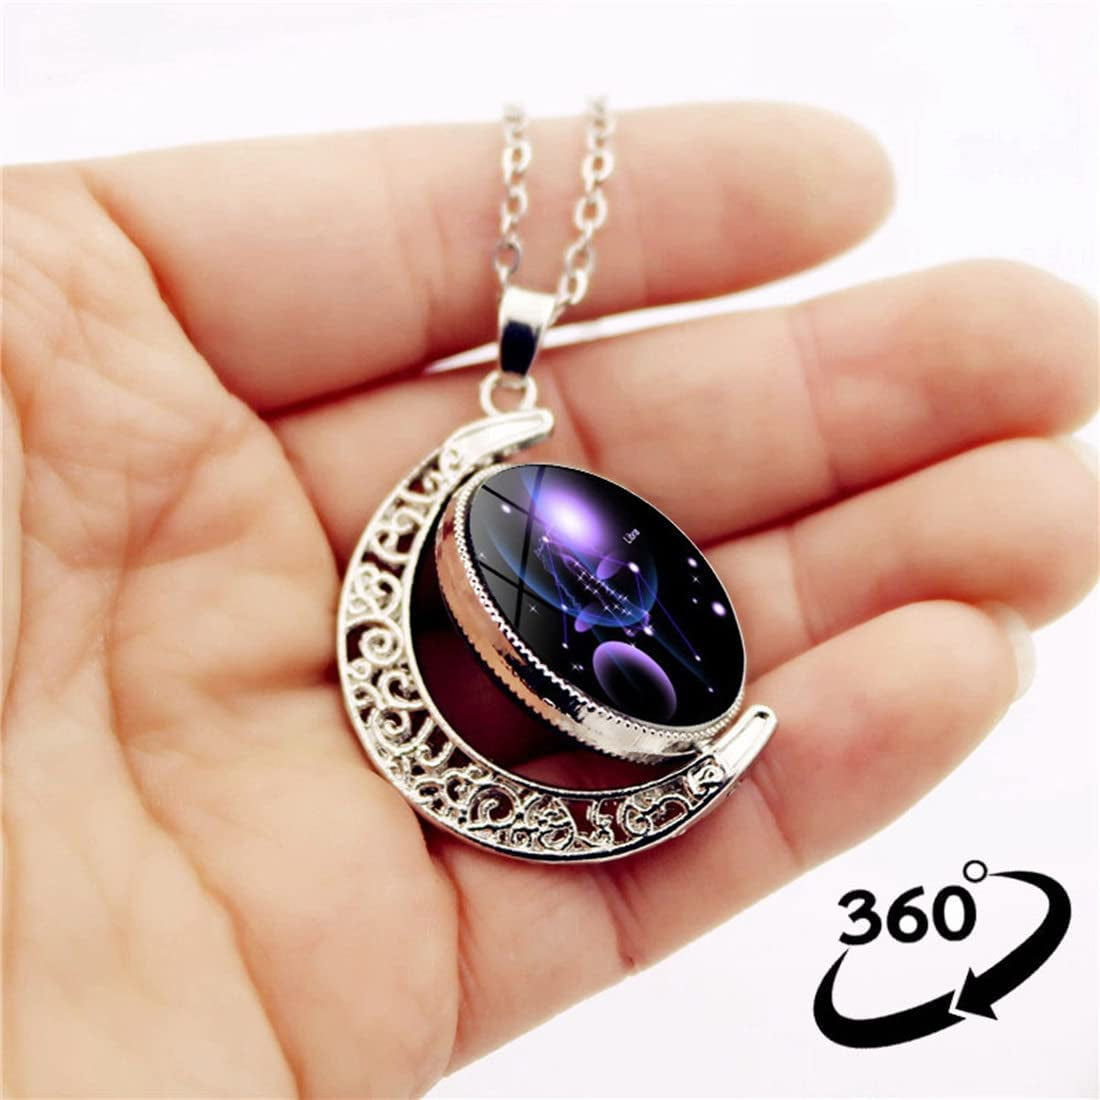 Zodiac Necklace Jewelry Birthday Gifts Astrology 12 Constellation Horoscope Sign Galaxy Crescent Half Moon Pendant Necklace